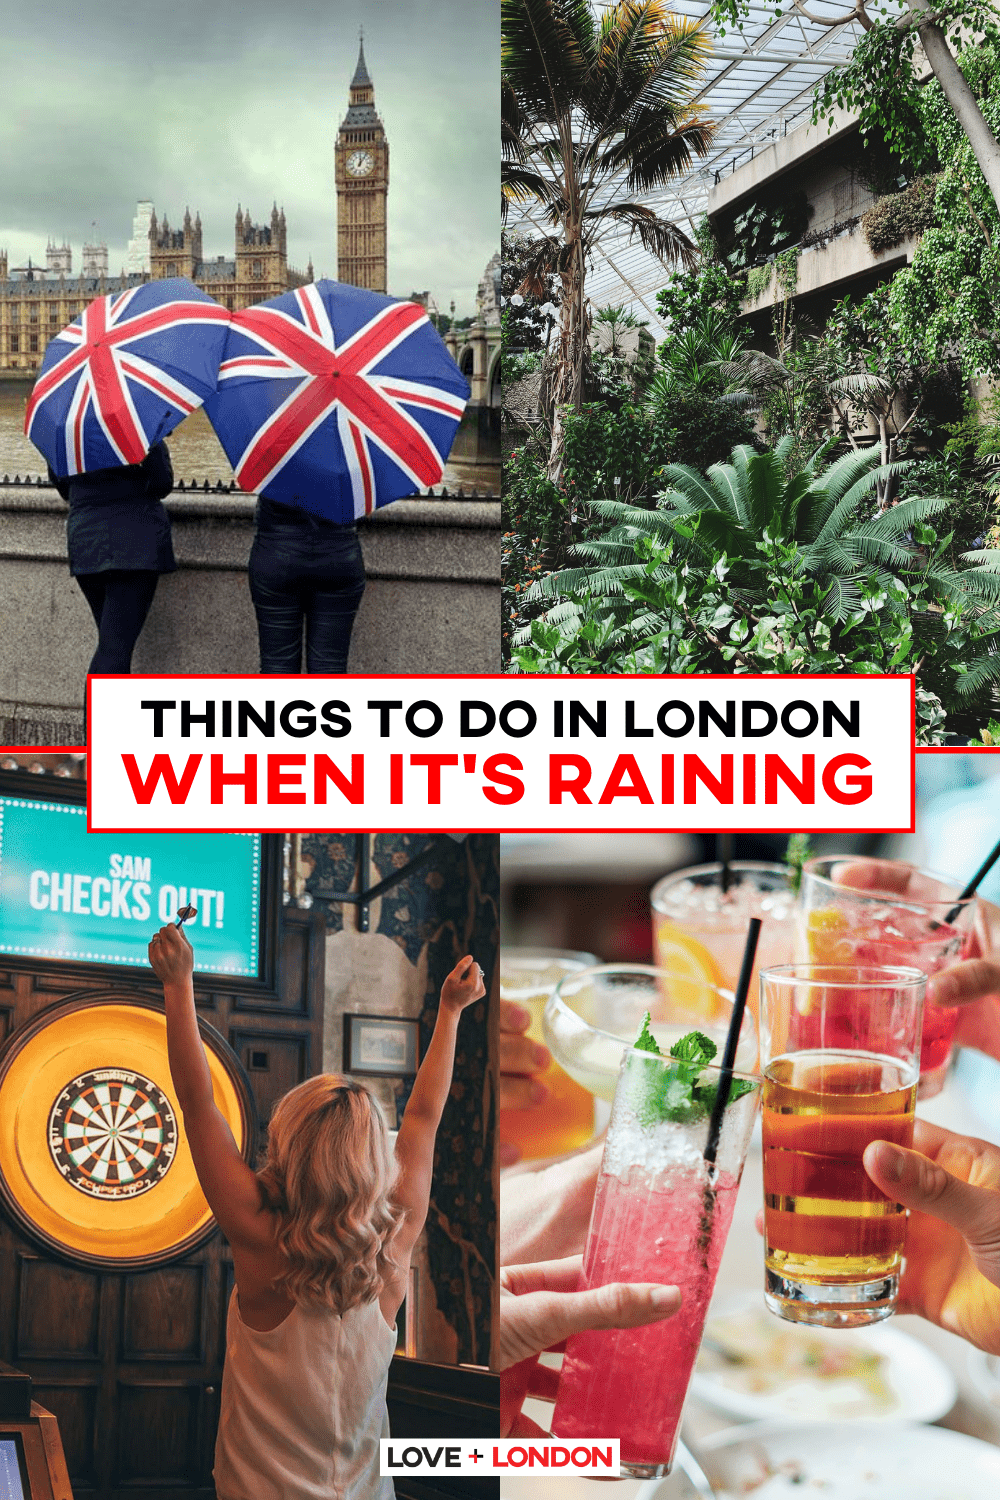 Things to Do in London when it's Raining